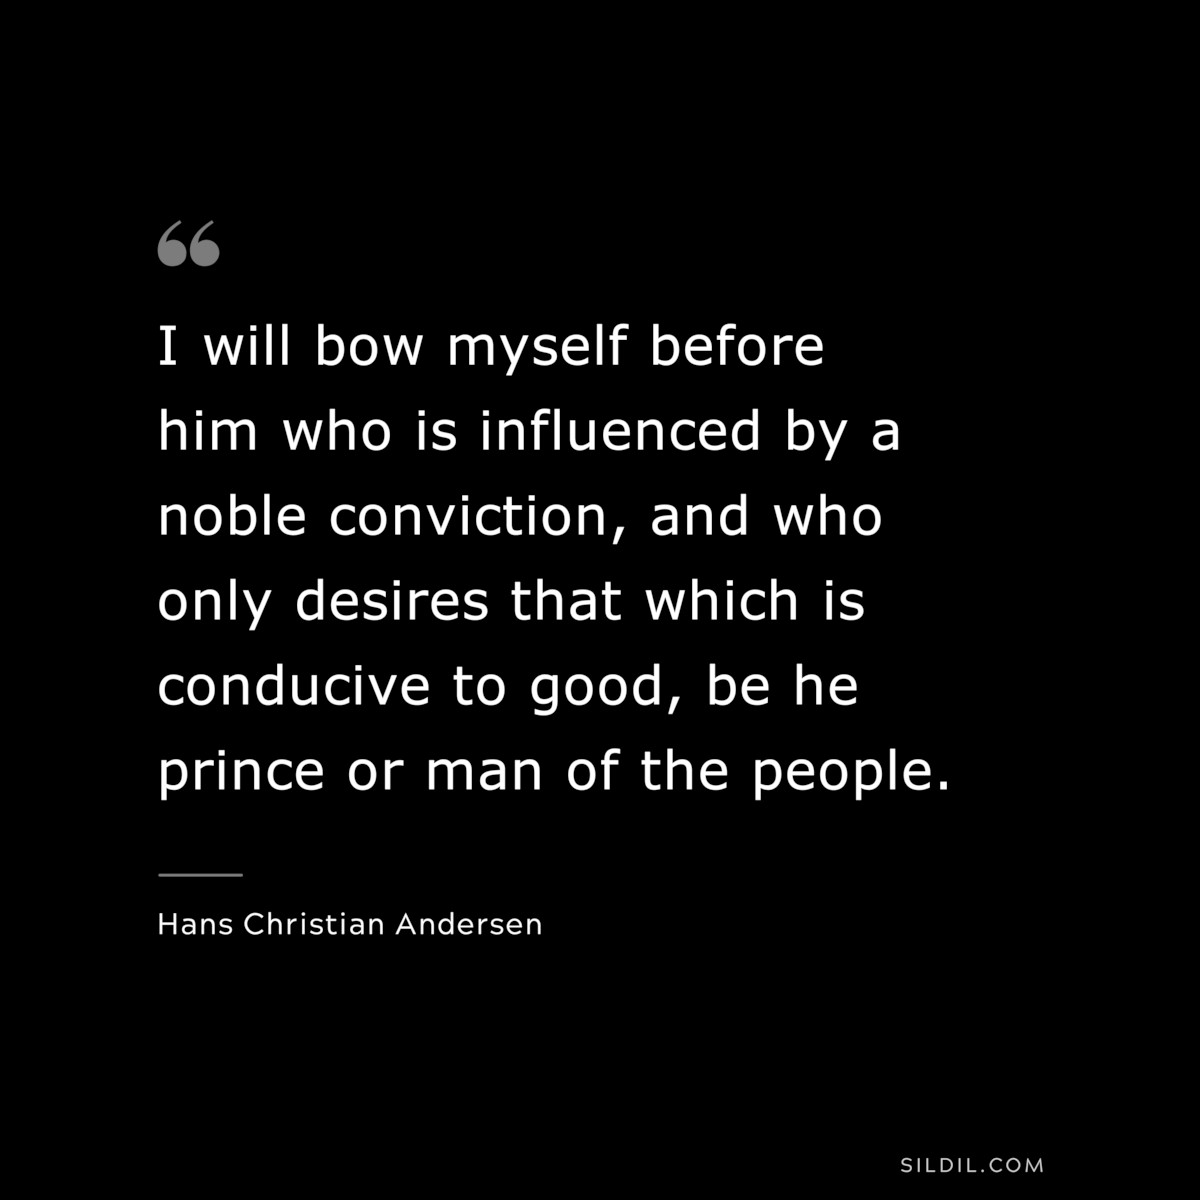 I will bow myself before him who is influenced by a noble conviction, and who only desires that which is conducive to good, be he prince or man of the people. ― Hans Christian Andersen